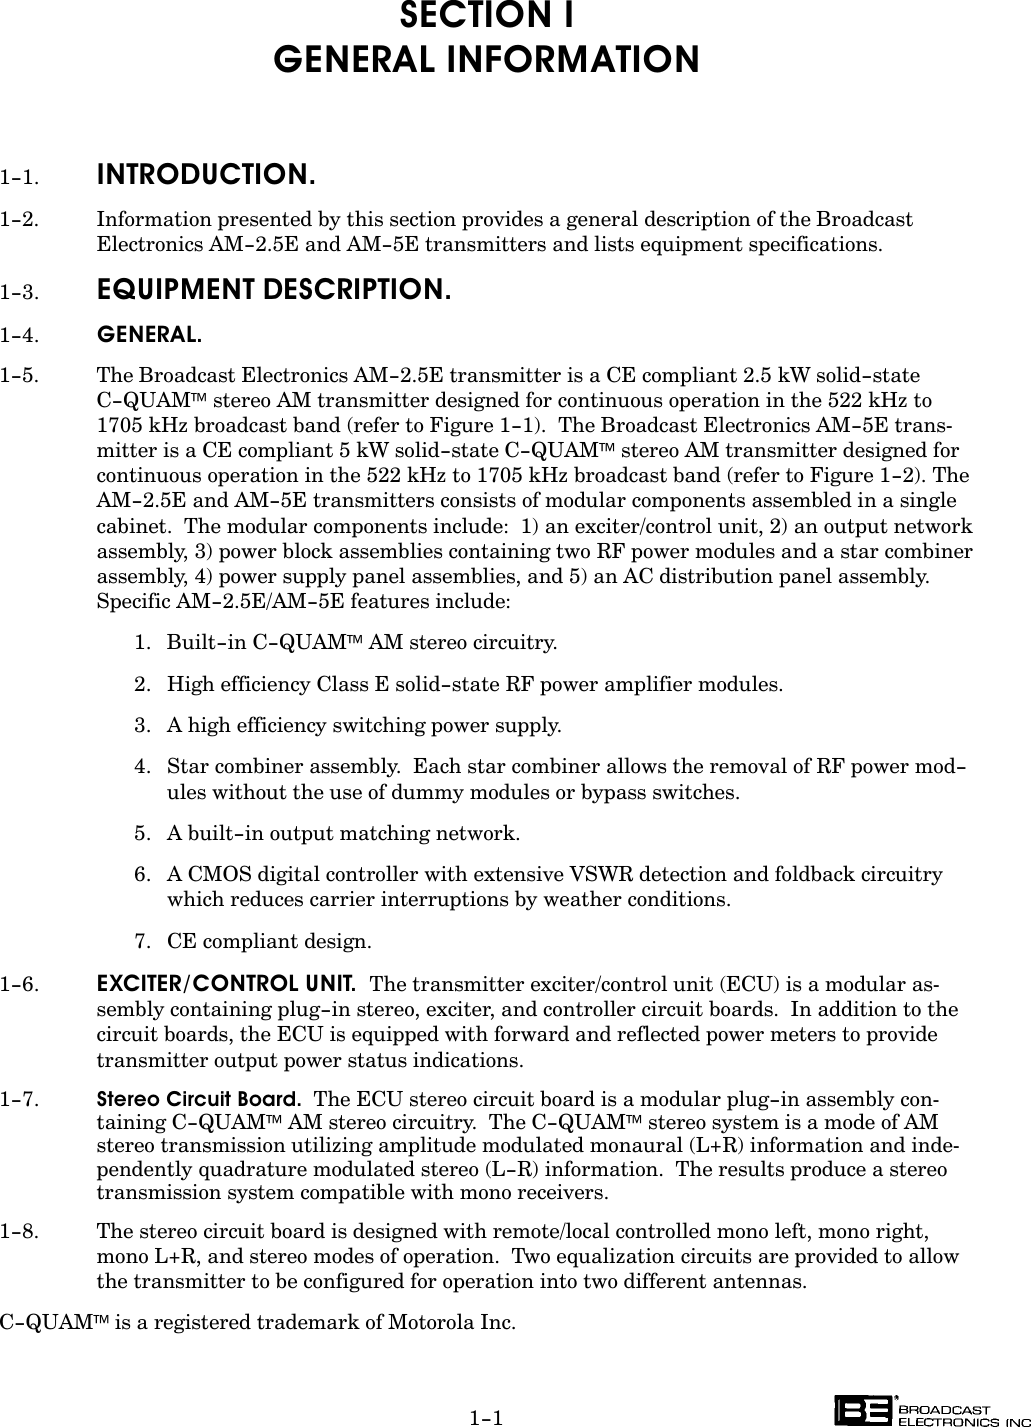 1-1SECTION IGENERAL INFORMATION1-1. INTRODUCTION.1-2. Information presented by this section provides a general description of the BroadcastElectronics AM-2.5E and AM-5E transmitters and lists equipment specifications.1-3. EQUIPMENT DESCRIPTION.1-4. GENERAL.1-5. The Broadcast Electronics AM-2.5E transmitter is a CE compliant 2.5 kW solid-stateC-QUAM stereo AM transmitter designed for continuous operation in the 522 kHz to1705 kHz broadcast band (refer to Figure 1-1).  The Broadcast Electronics AM-5E transĆmitter is a CE compliant 5 kW solid-state C-QUAM stereo AM transmitter designed forcontinuous operation in the 522 kHz to 1705 kHz broadcast band (refer to Figure 1-2). TheAM-2.5E and AM-5E transmitters consists of modular components assembled in a singlecabinet.  The modular components include:  1) an exciter/control unit, 2) an output networkassembly, 3) power block assemblies containing two RF power modules and a star combinerassembly, 4) power supply panel assemblies, and 5) an AC distribution panel assembly.Specific AM-2.5E/AM-5E features include:1. Built-in C-QUAM AM stereo circuitry.2. High efficiency Class E solid-state RF power amplifier modules.3. A high efficiency switching power supply.4. Star combiner assembly.  Each star combiner allows the removal of RF power mod-ules without the use of dummy modules or bypass switches.5. A built-in output matching network.6. A CMOS digital controller with extensive VSWR detection and foldback circuitry which reduces carrier interruptions by weather conditions.7. CE compliant design.1-6. EXCITER/CONTROL UNIT.  The transmitter exciter/control unit (ECU) is a modular asĆsembly containing plug-in stereo, exciter, and controller circuit boards.  In addition to thecircuit boards, the ECU is equipped with forward and reflected power meters to providetransmitter output power status indications.1-7. Stereo Circuit Board.  The ECU stereo circuit board is a modular plug-in assembly conĆtaining C-QUAM AM stereo circuitry.  The C-QUAM stereo system is a mode of AMstereo transmission utilizing amplitude modulated monaural (L+R) information and indeĆpendently quadrature modulated stereo (L-R) information.  The results produce a stereotransmission system compatible with mono receivers.1-8. The stereo circuit board is designed with remote/local controlled mono left, mono right,mono L+R, and stereo modes of operation.  Two equalization circuits are provided to allowthe transmitter to be configured for operation into two different antennas.C-QUAMis a registered trademark of Motorola Inc.